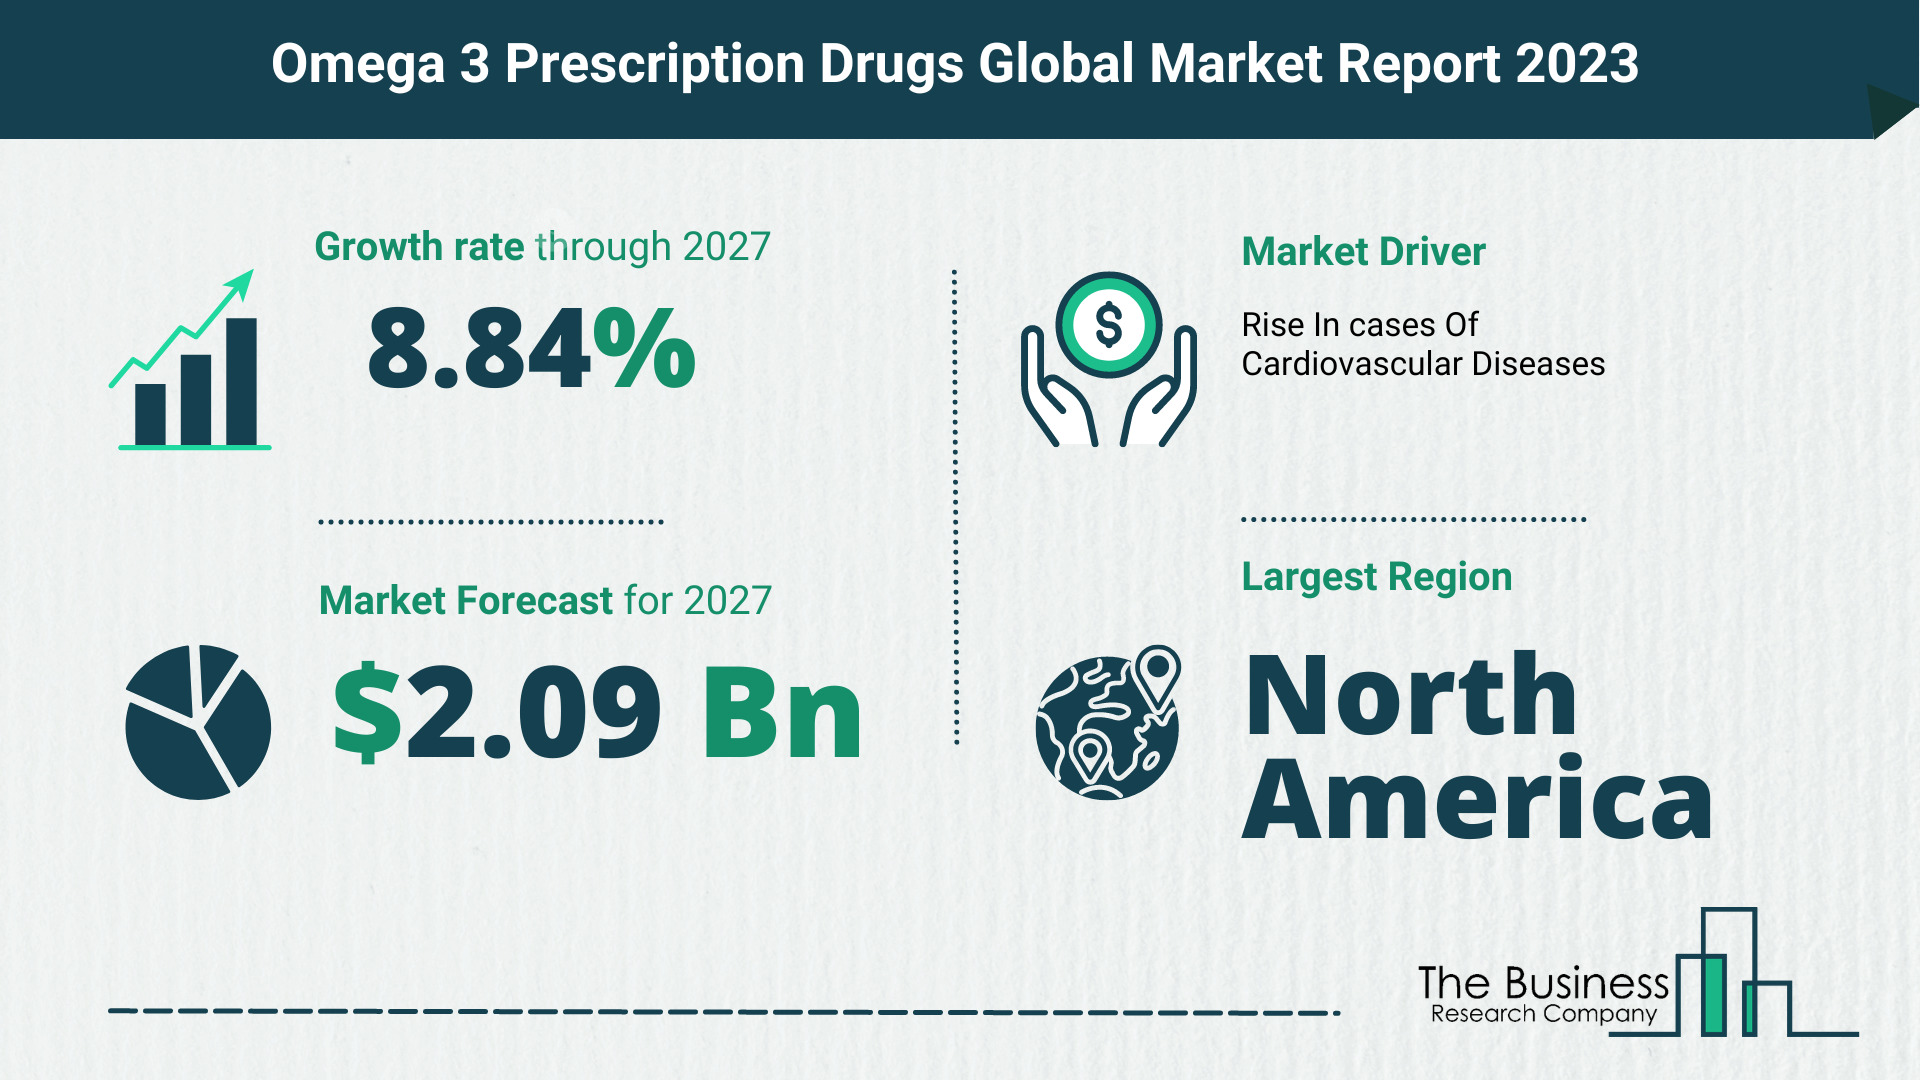 Omega 3 Prescription Drugs Market Size, Share, And Growth Rate Analysis 2023